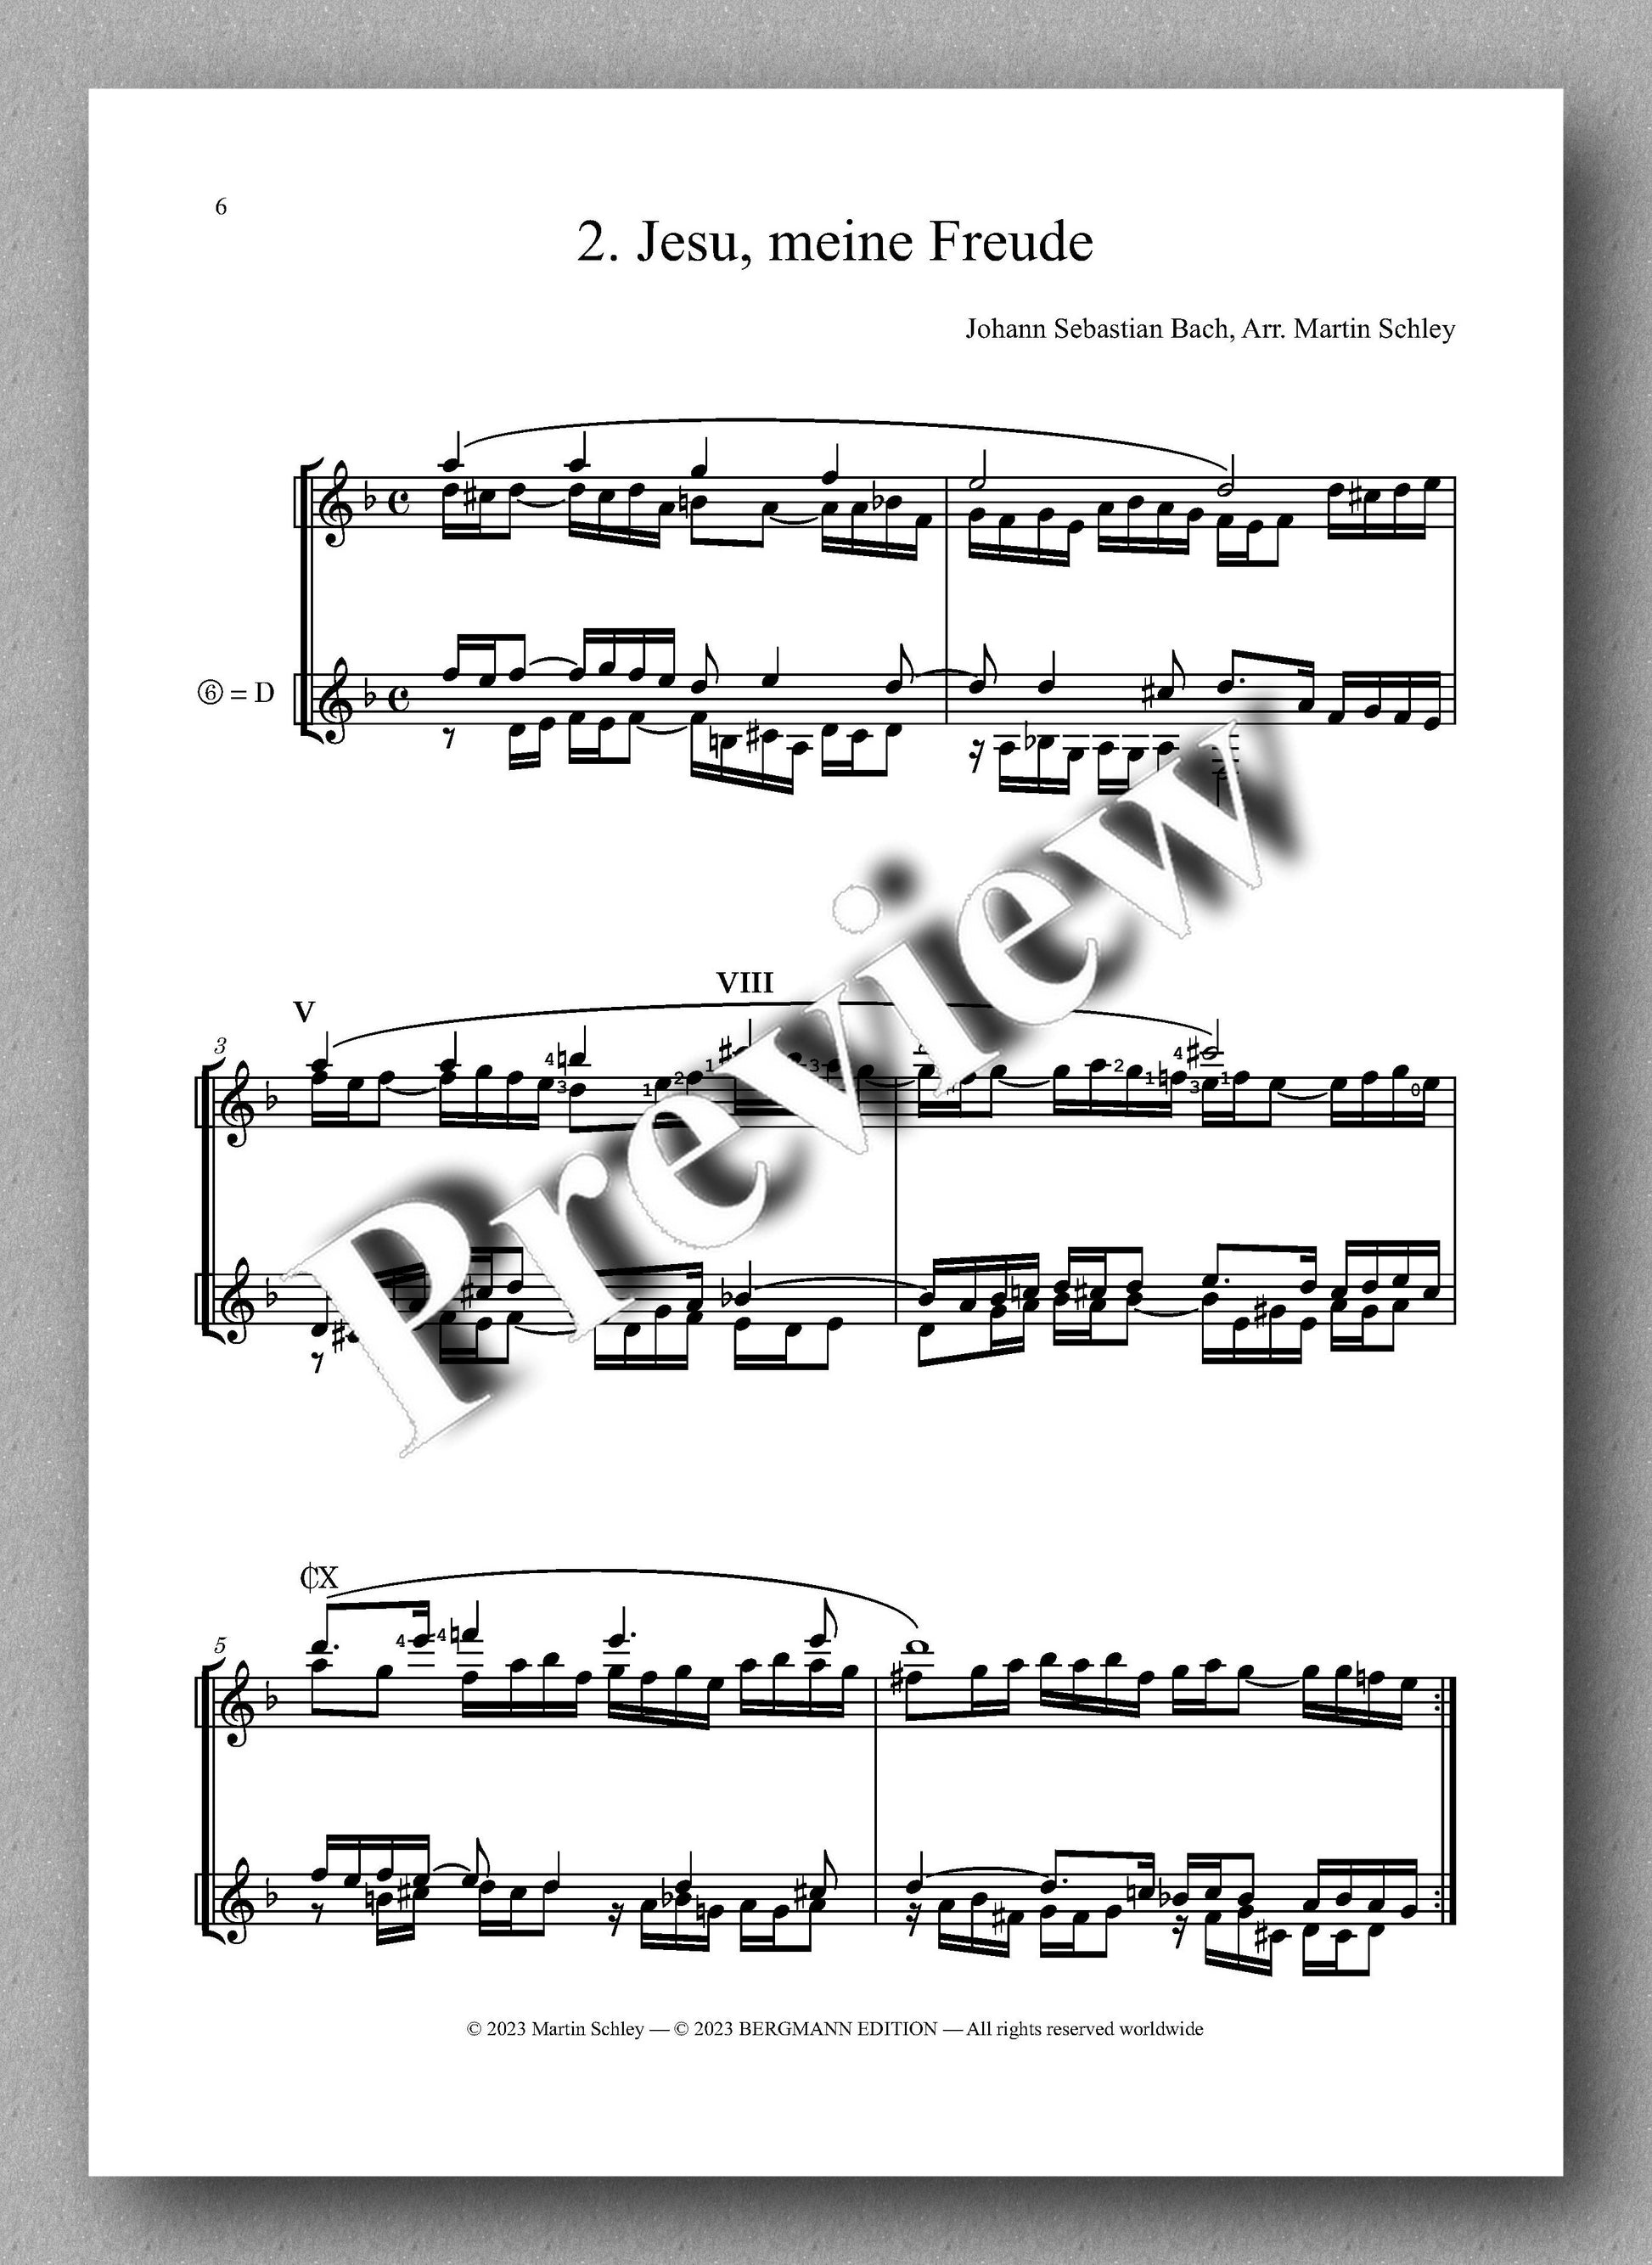 Bach-Schley, Seven Duets - preview of the music score 2